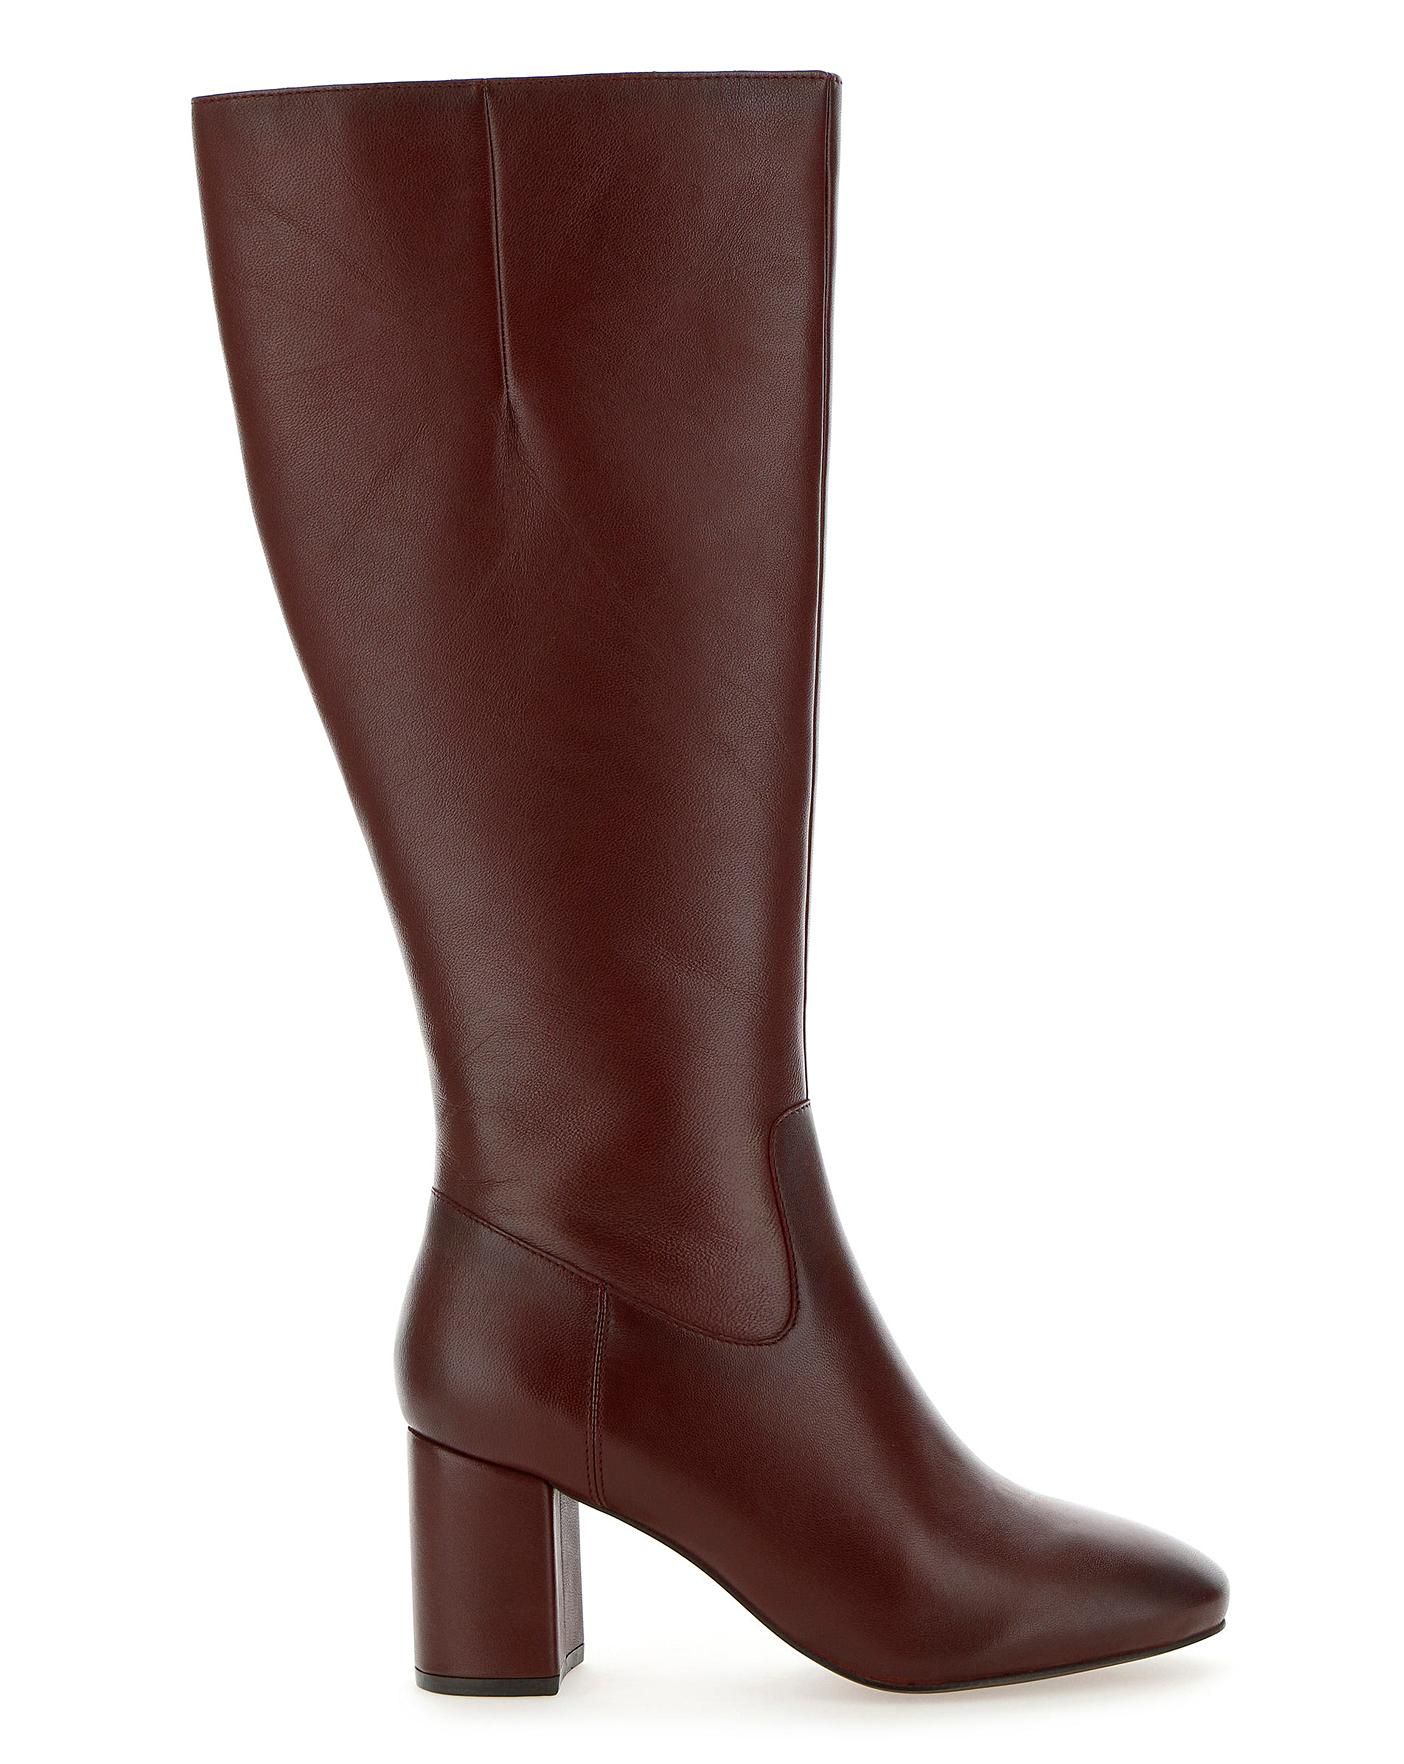 wide fitting knee high boots uk